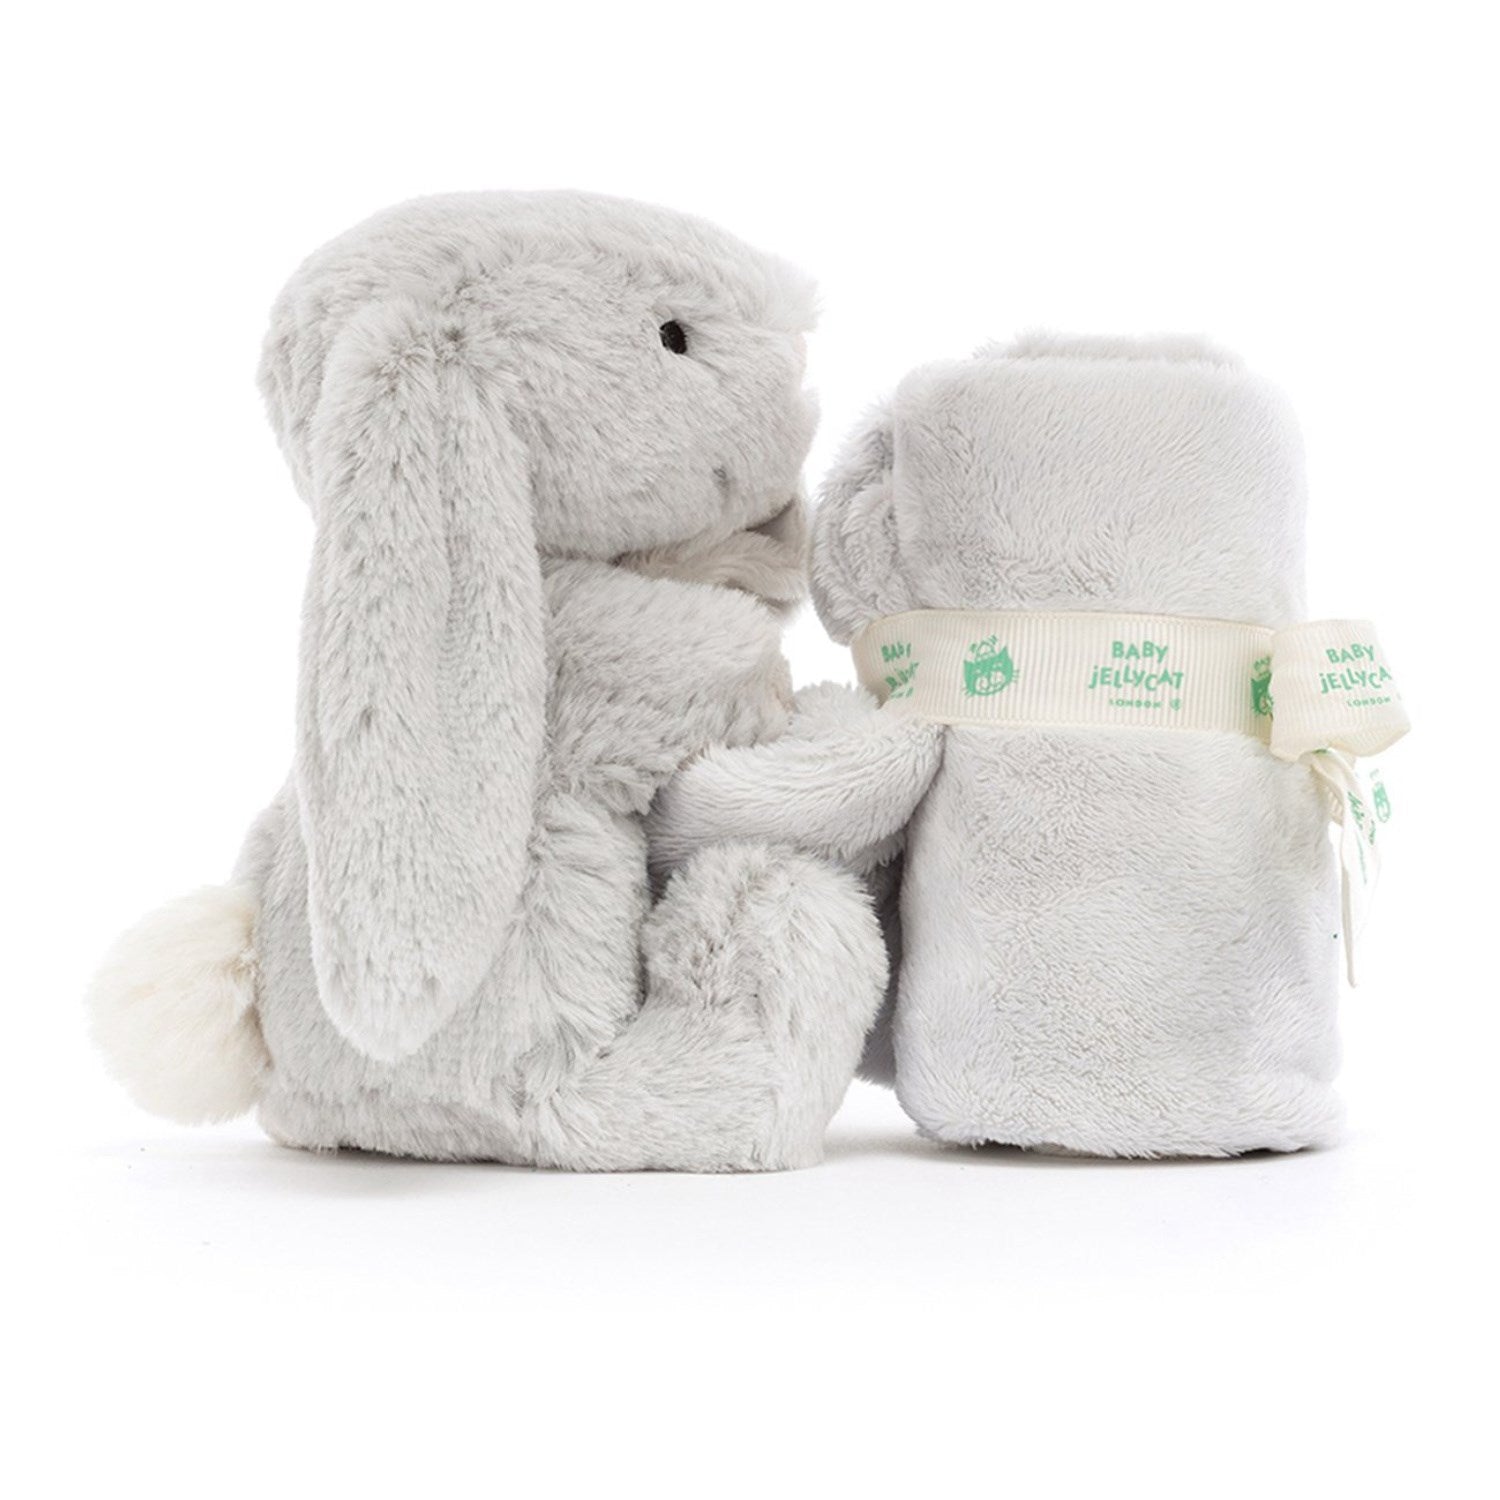 Jellycat Bashful Silver Bunny Soother 4